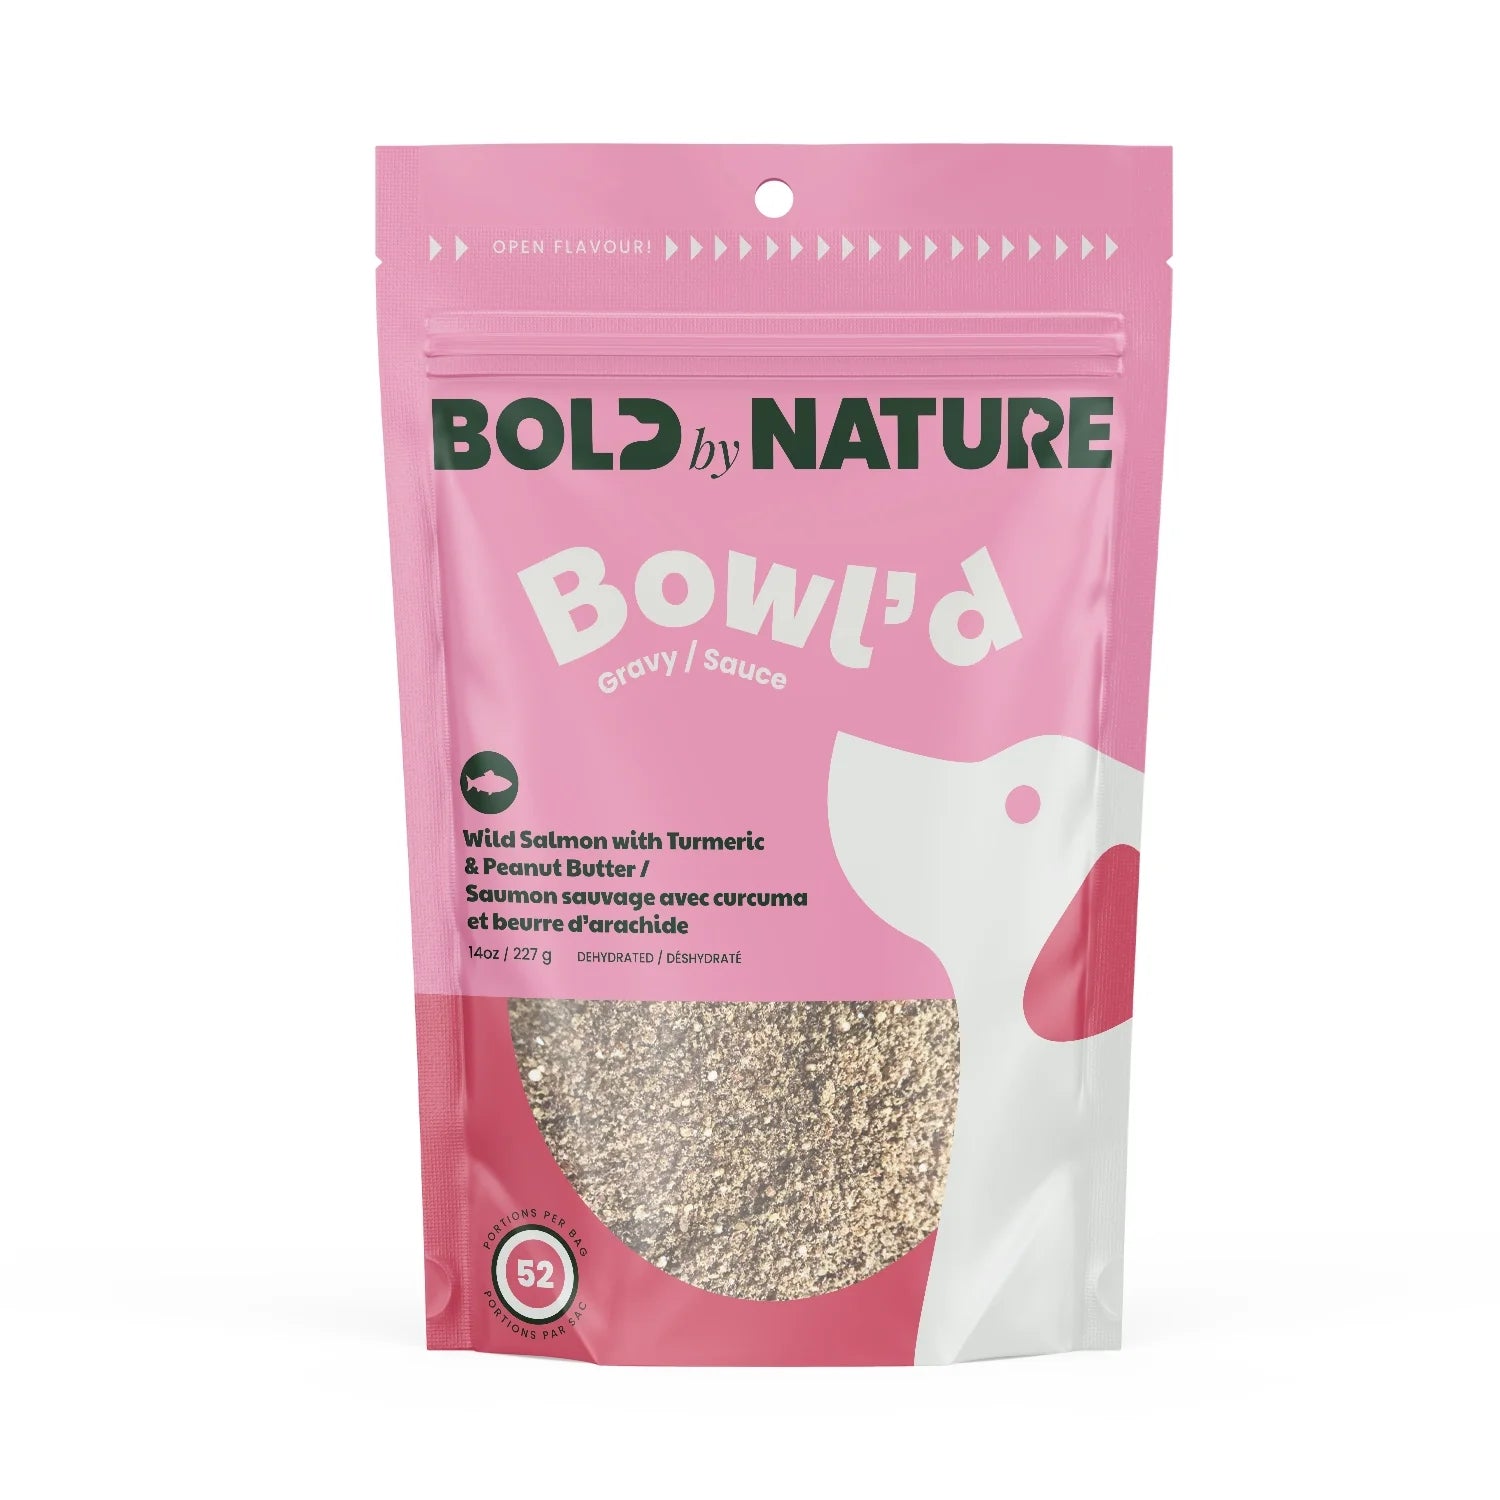 Bold by Nature - Bowl’d Dehydrated Gravy – Wild Salmon with Turmeric & Peanut Butter (For Dogs)